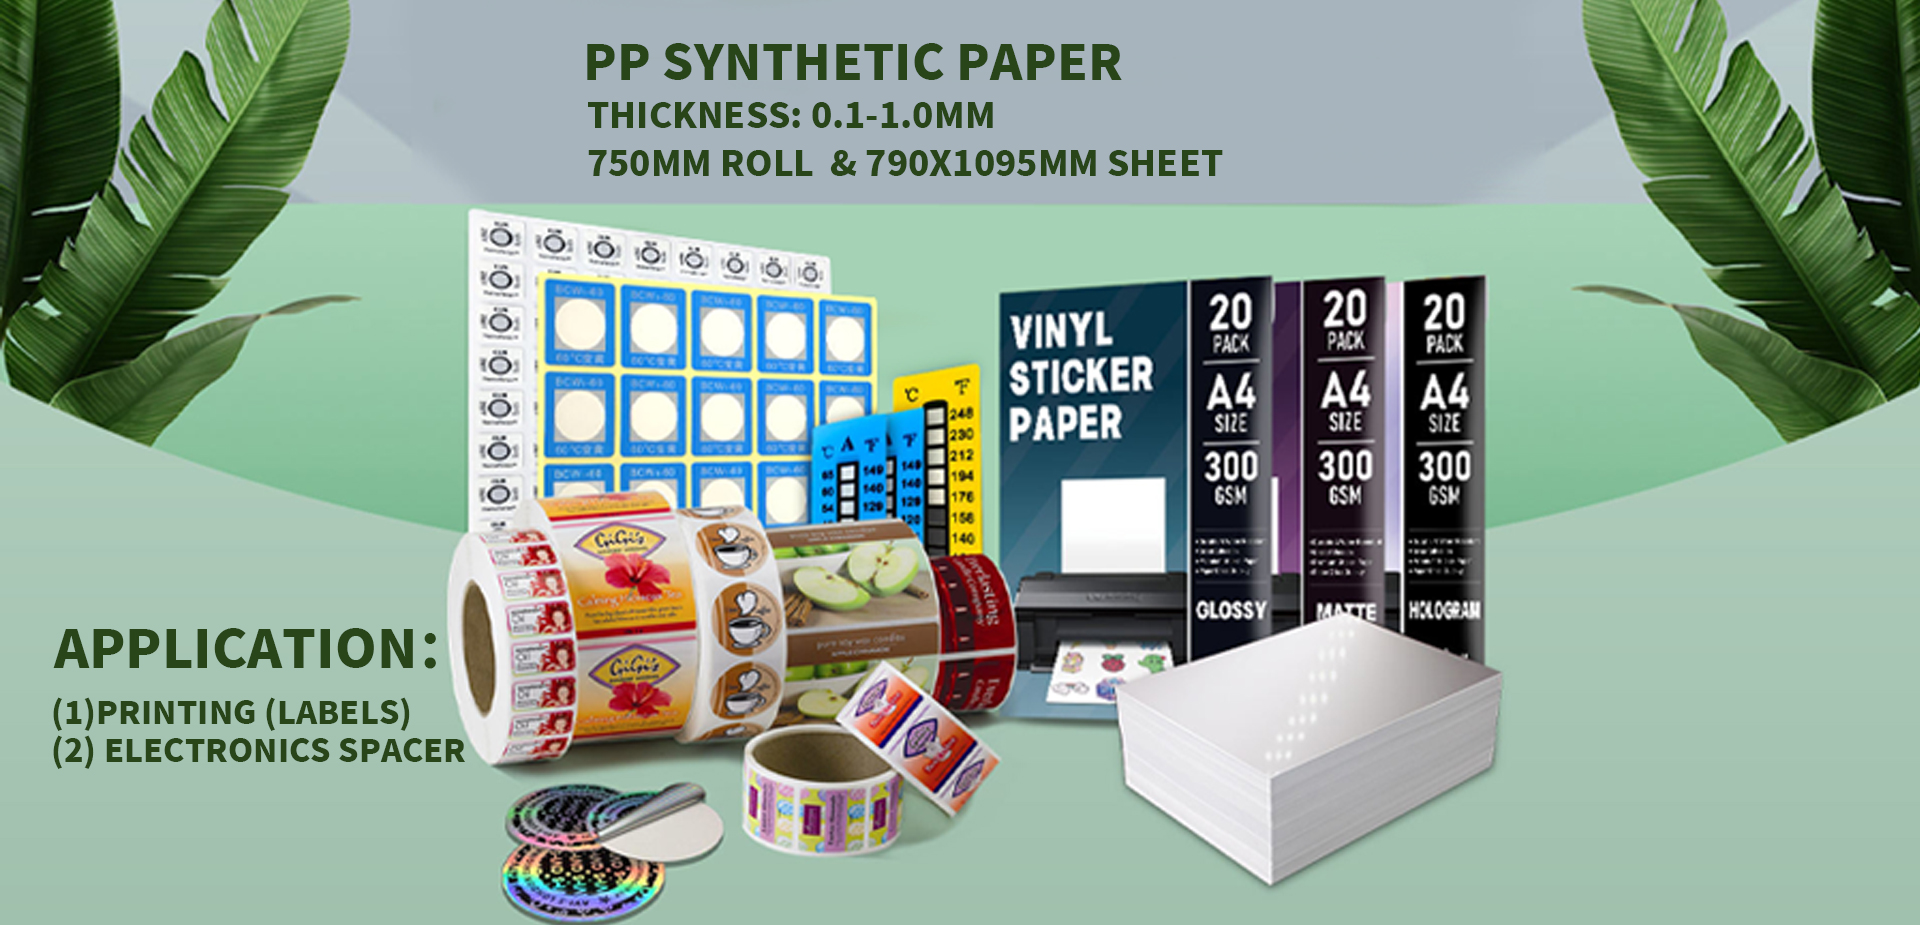 PP Synthetic paper